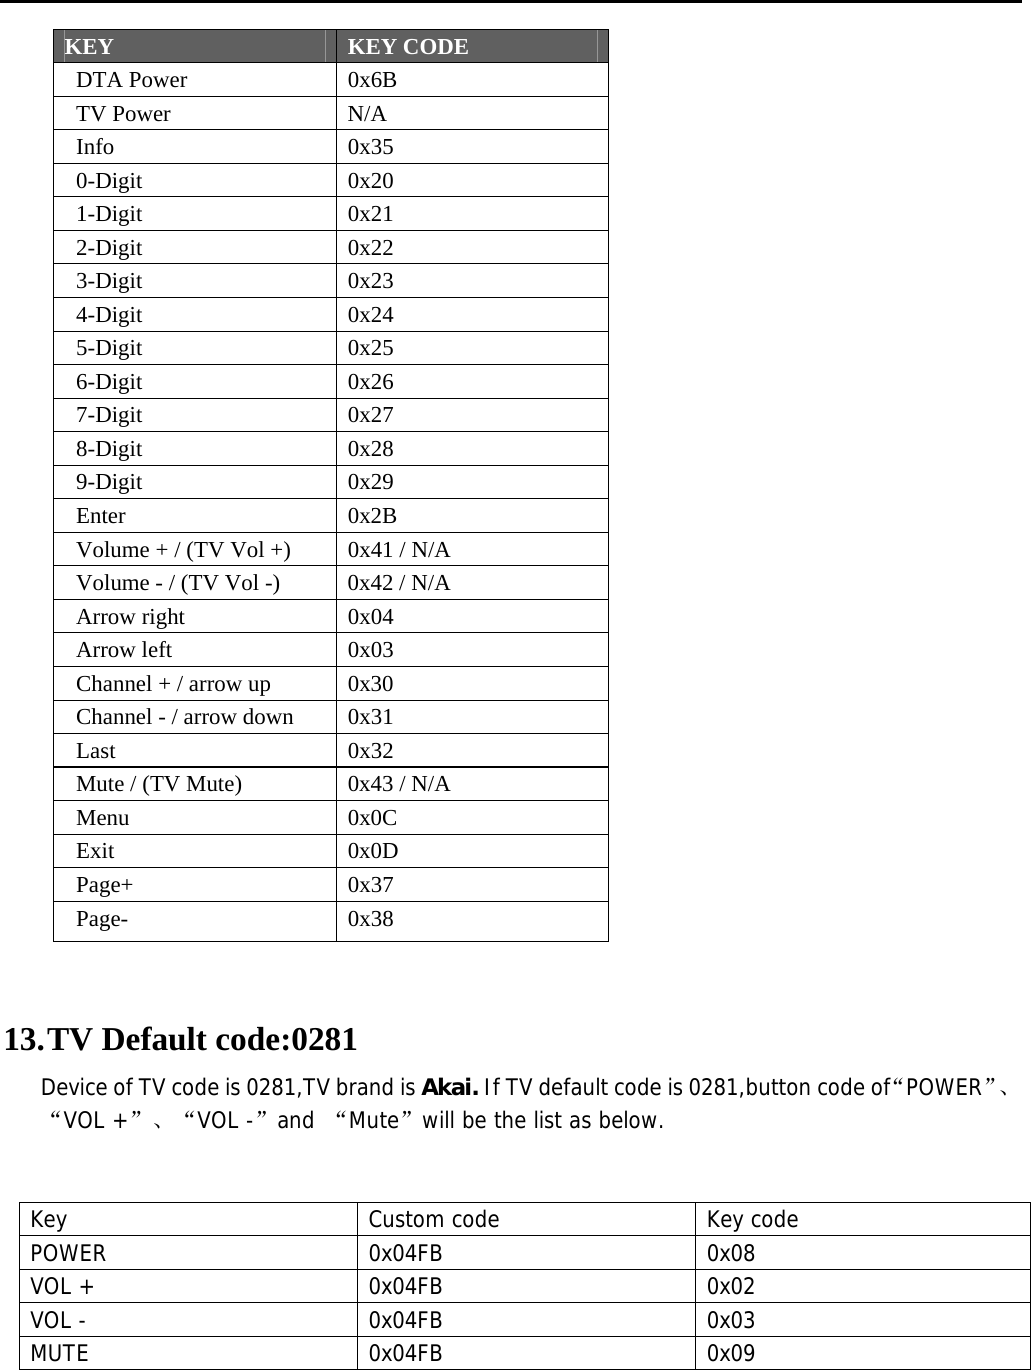       KEY  KEY CODE  DTA Power  0x6B  TV Power  N/A  Info  0x35  0-Digit  0x20  1-Digit  0x21  2-Digit  0x22  3-Digit  0x23  4-Digit  0x24  5-Digit  0x25  6-Digit  0x26  7-Digit  0x27  8-Digit  0x28  9-Digit  0x29  Enter  0x2B   Volume + / (TV Vol +)  0x41 / N/A   Volume - / (TV Vol -)  0x42 / N/A  Arrow right  0x04  Arrow left  0x03   Channel + / arrow up  0x30   Channel - / arrow down  0x31  Last  0x32   Mute / (TV Mute)  0x43 / N/A  Menu  0x0C  Exit  0x0D  Page+  0x37  Page-  0x38   13. TV Default code:0281 Device of TV code is 0281,TV brand is Akai. If TV default code is 0281,button code of“POWER”、“VOL +”、“VOL -”and “Mute”will be the list as below.  Key Custom code Key code POWER 0x04FB 0x08 VOL +  0x04FB  0x02 VOL -  0x04FB  0x03 MUTE 0x04FB 0x09    